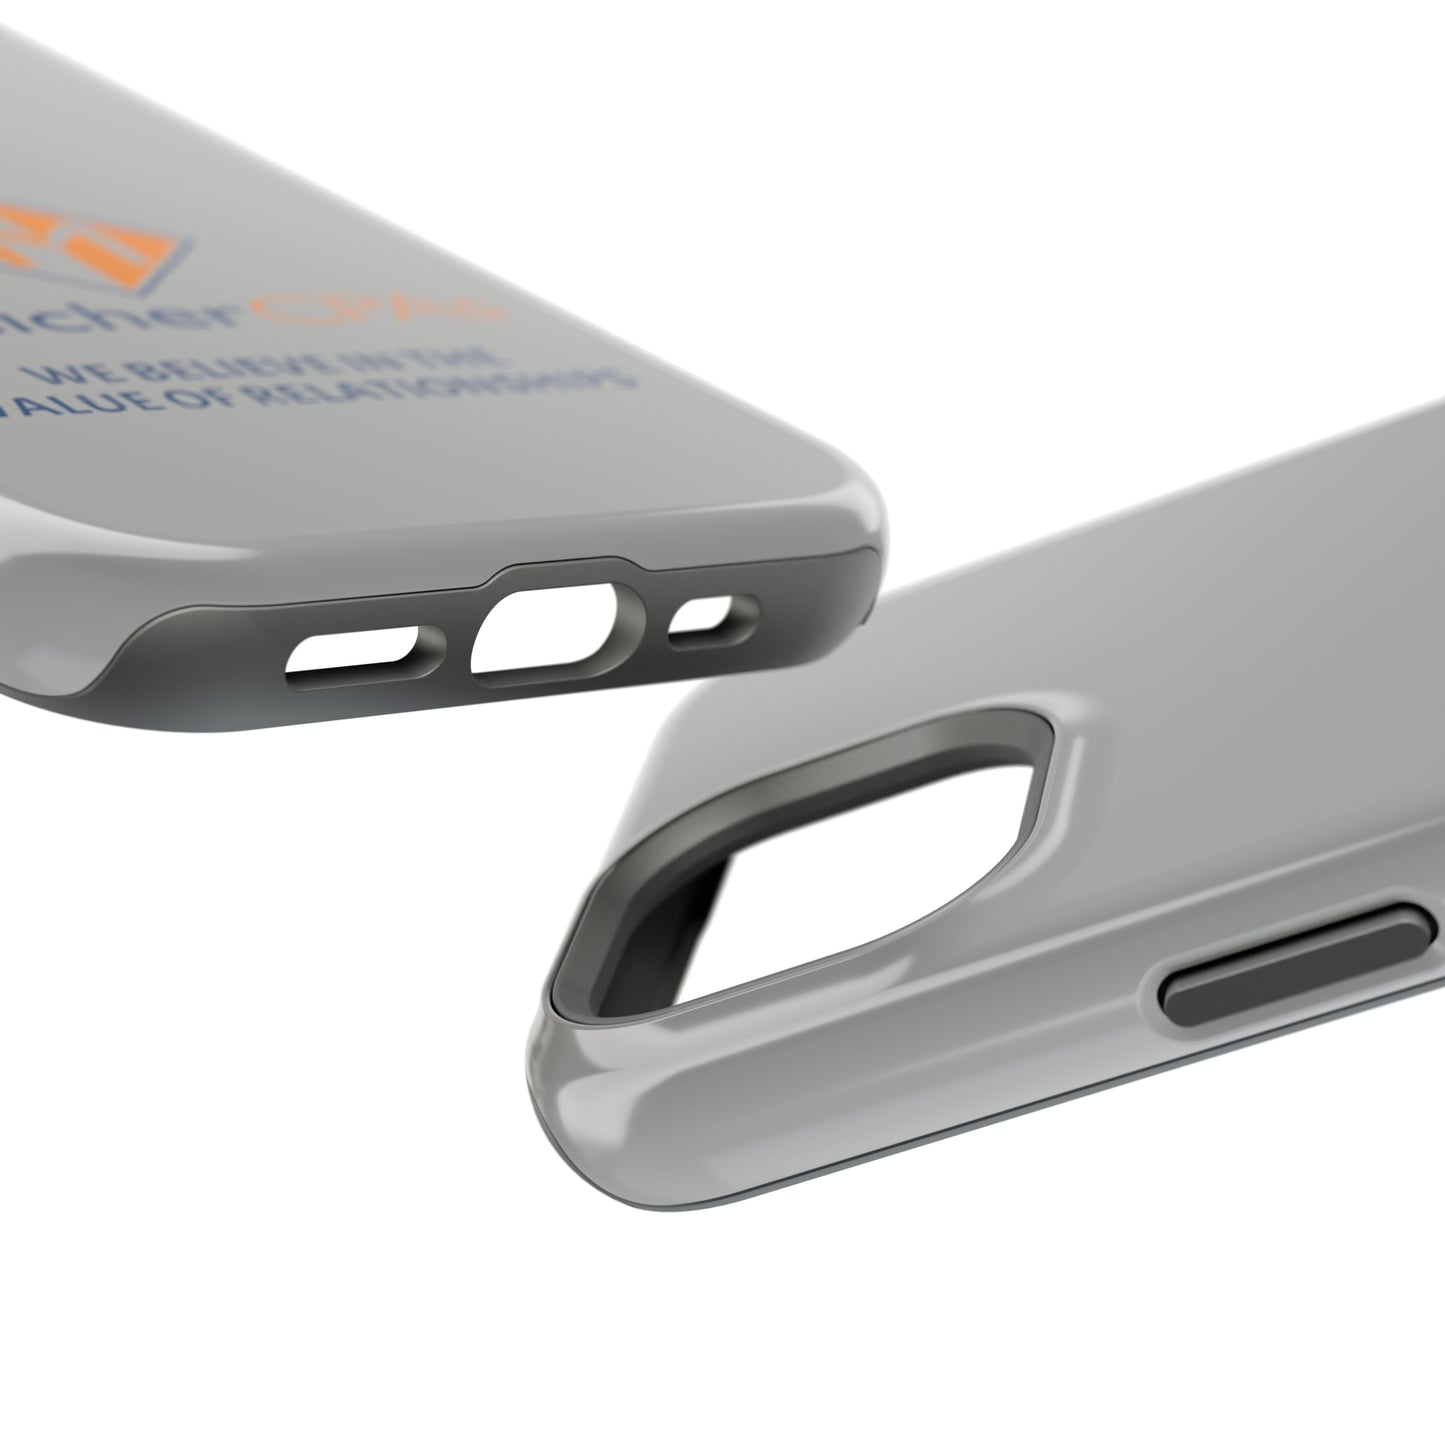 Meicher - We Believe MagSafe Tough Cases